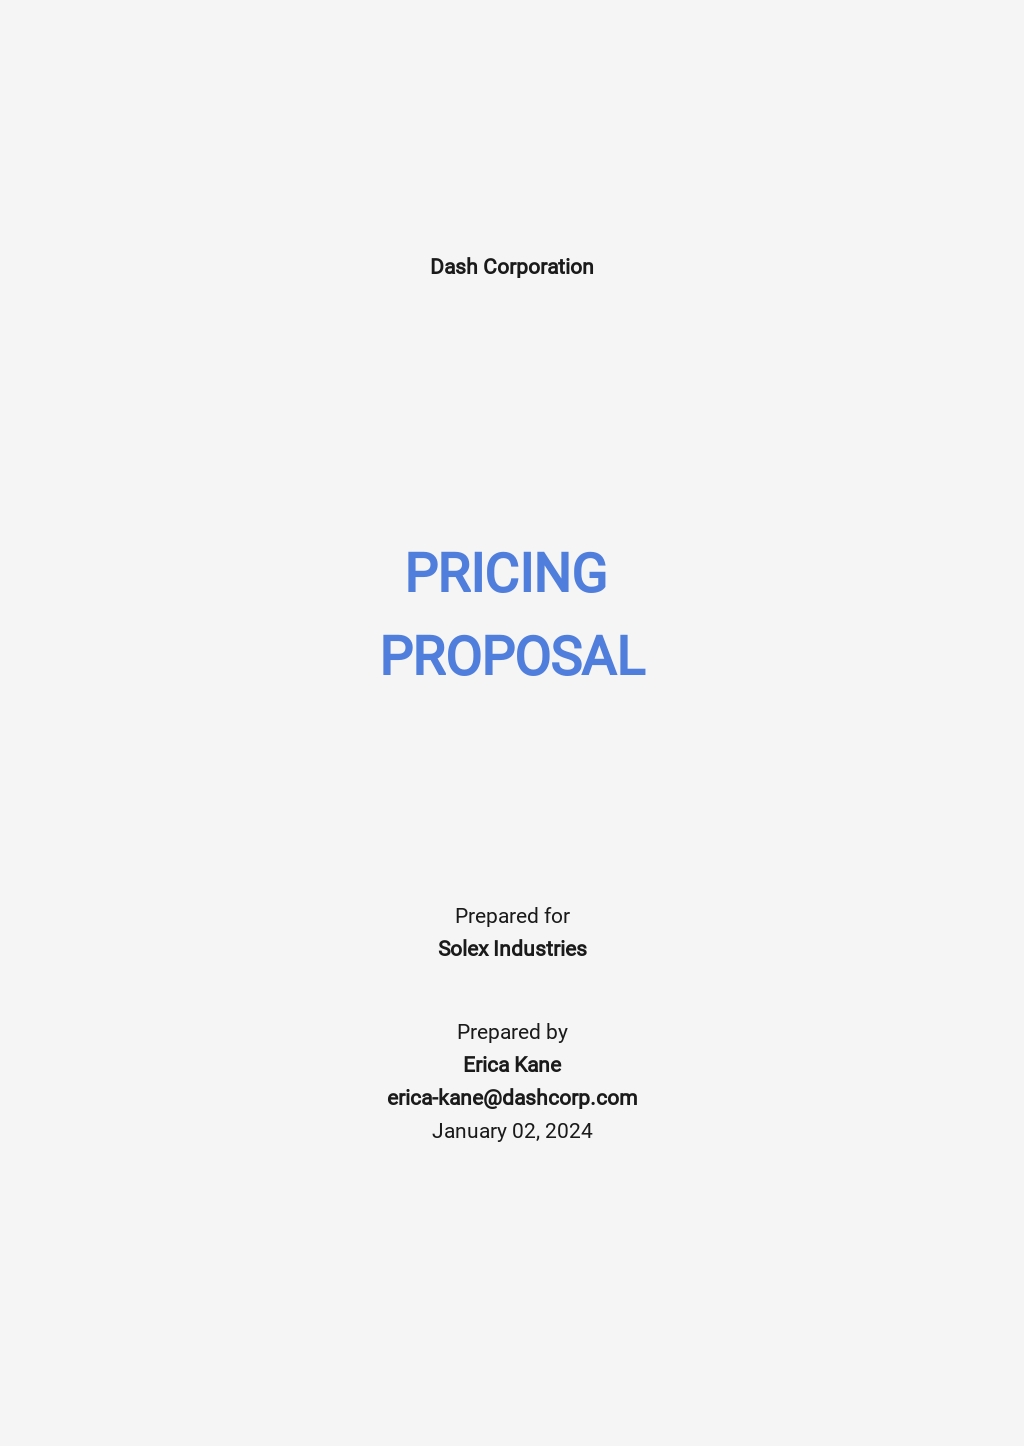 Business Pricing Proposal Template.jpe